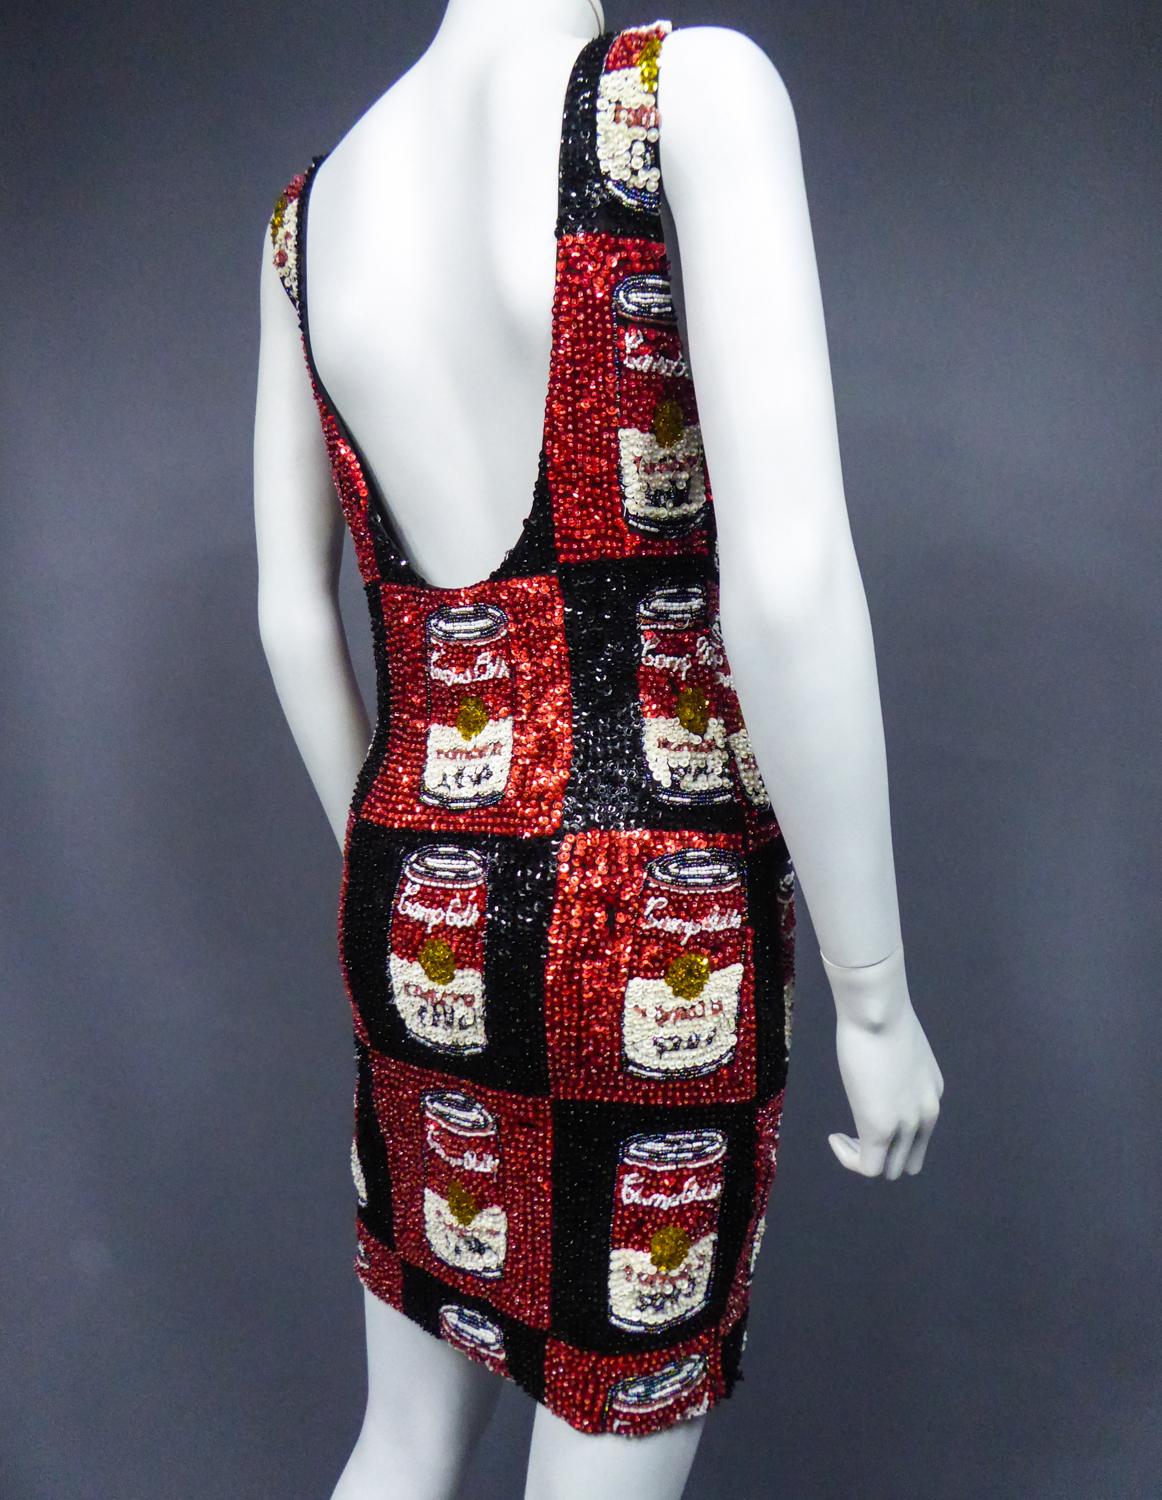 A Campbell's Soup Embroidered Mini Dress Andy Warhol Pink Soda Circa 1990 6